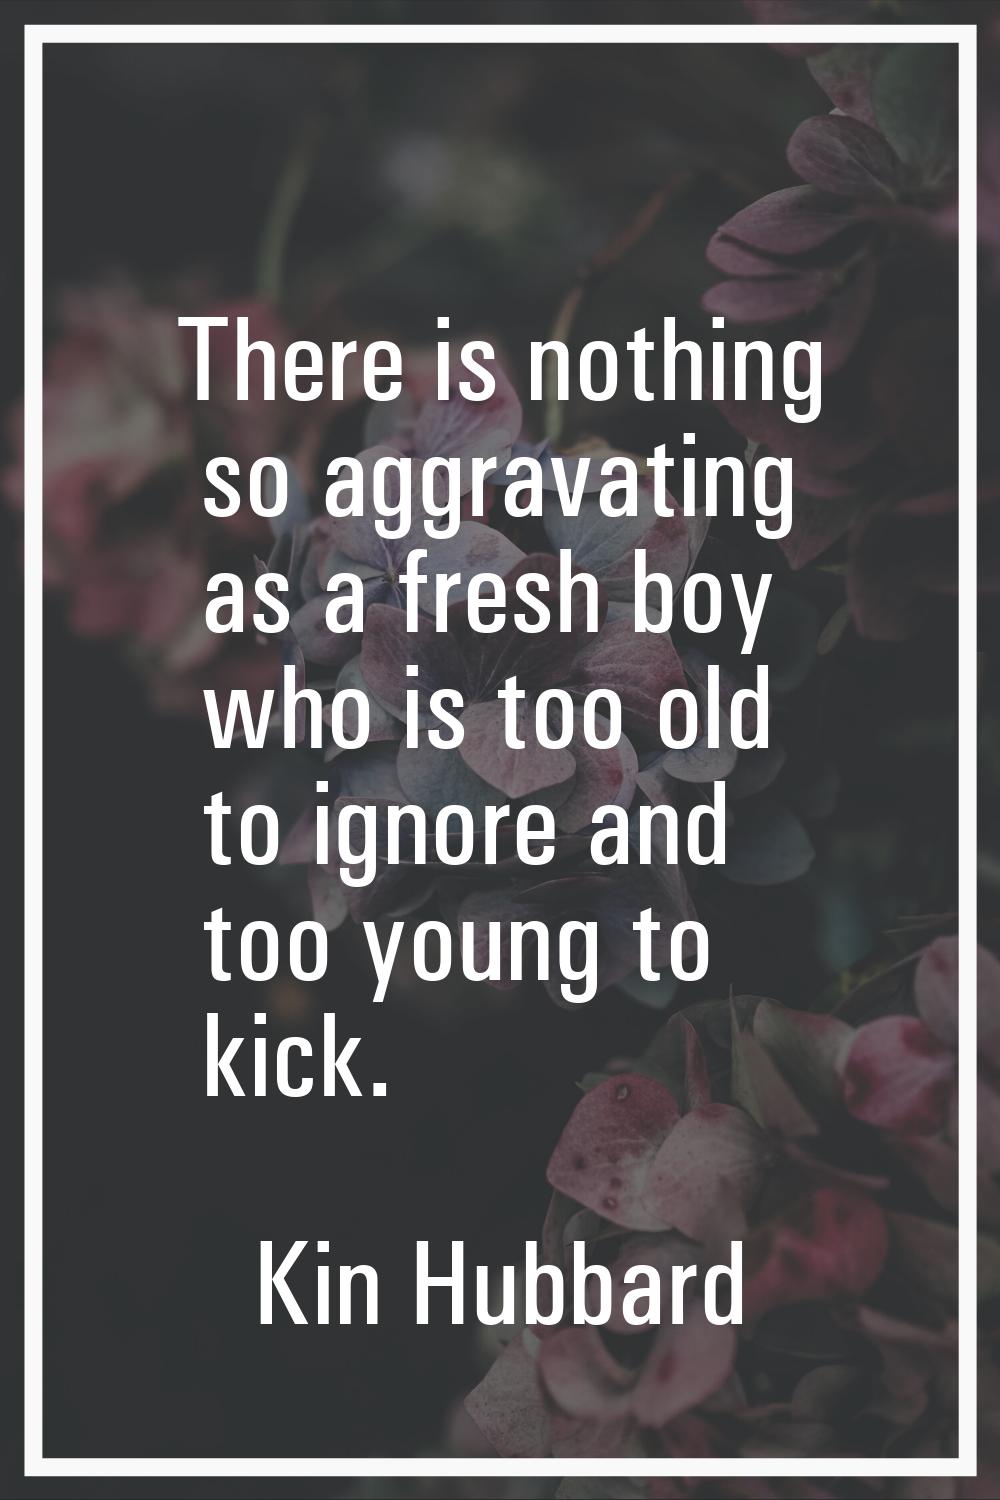 There is nothing so aggravating as a fresh boy who is too old to ignore and too young to kick.